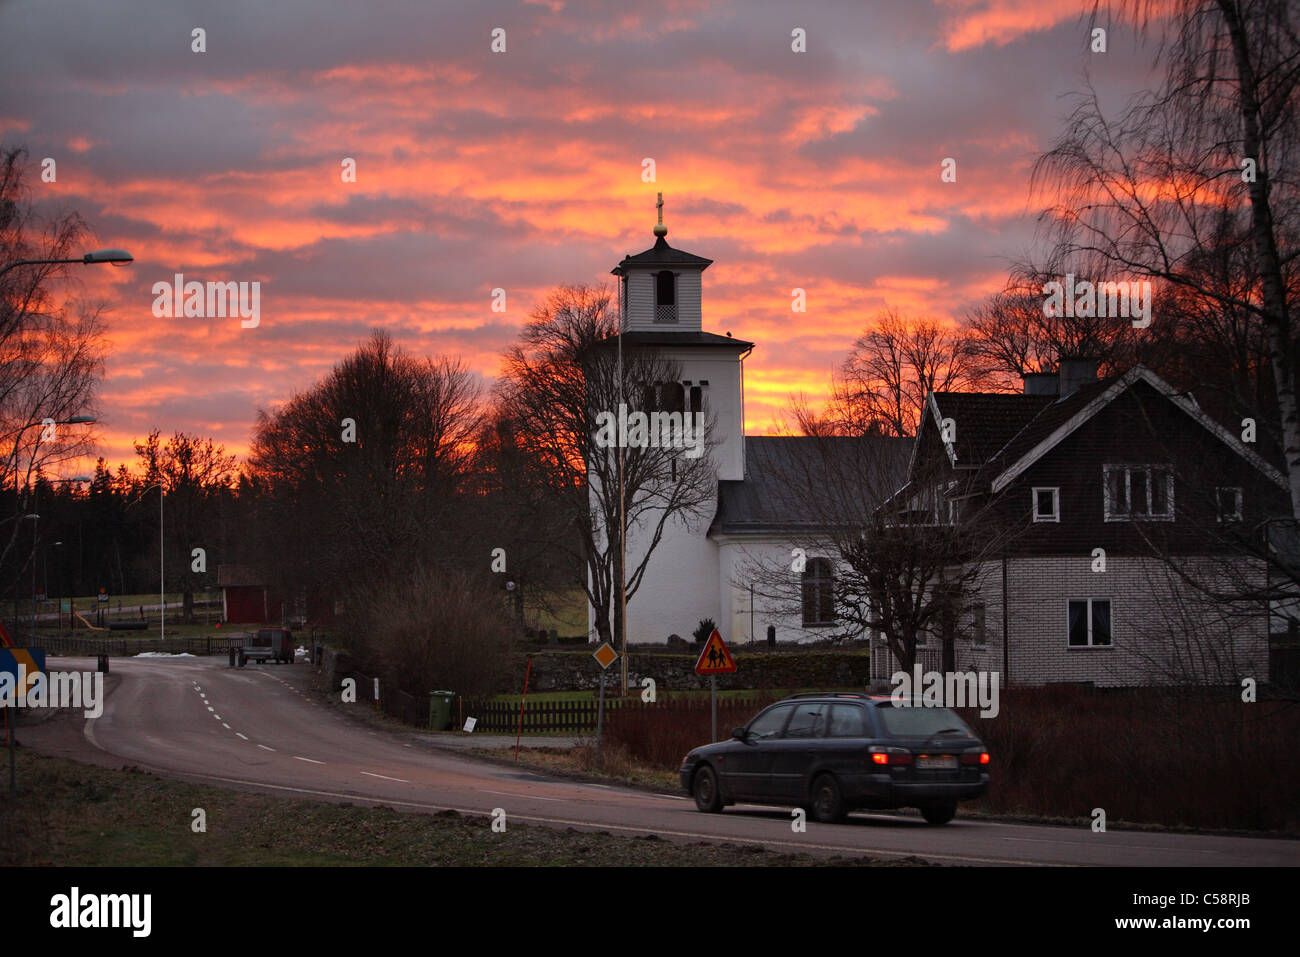 A village with a church in the evening, Belloe, Sweden Stock Photo